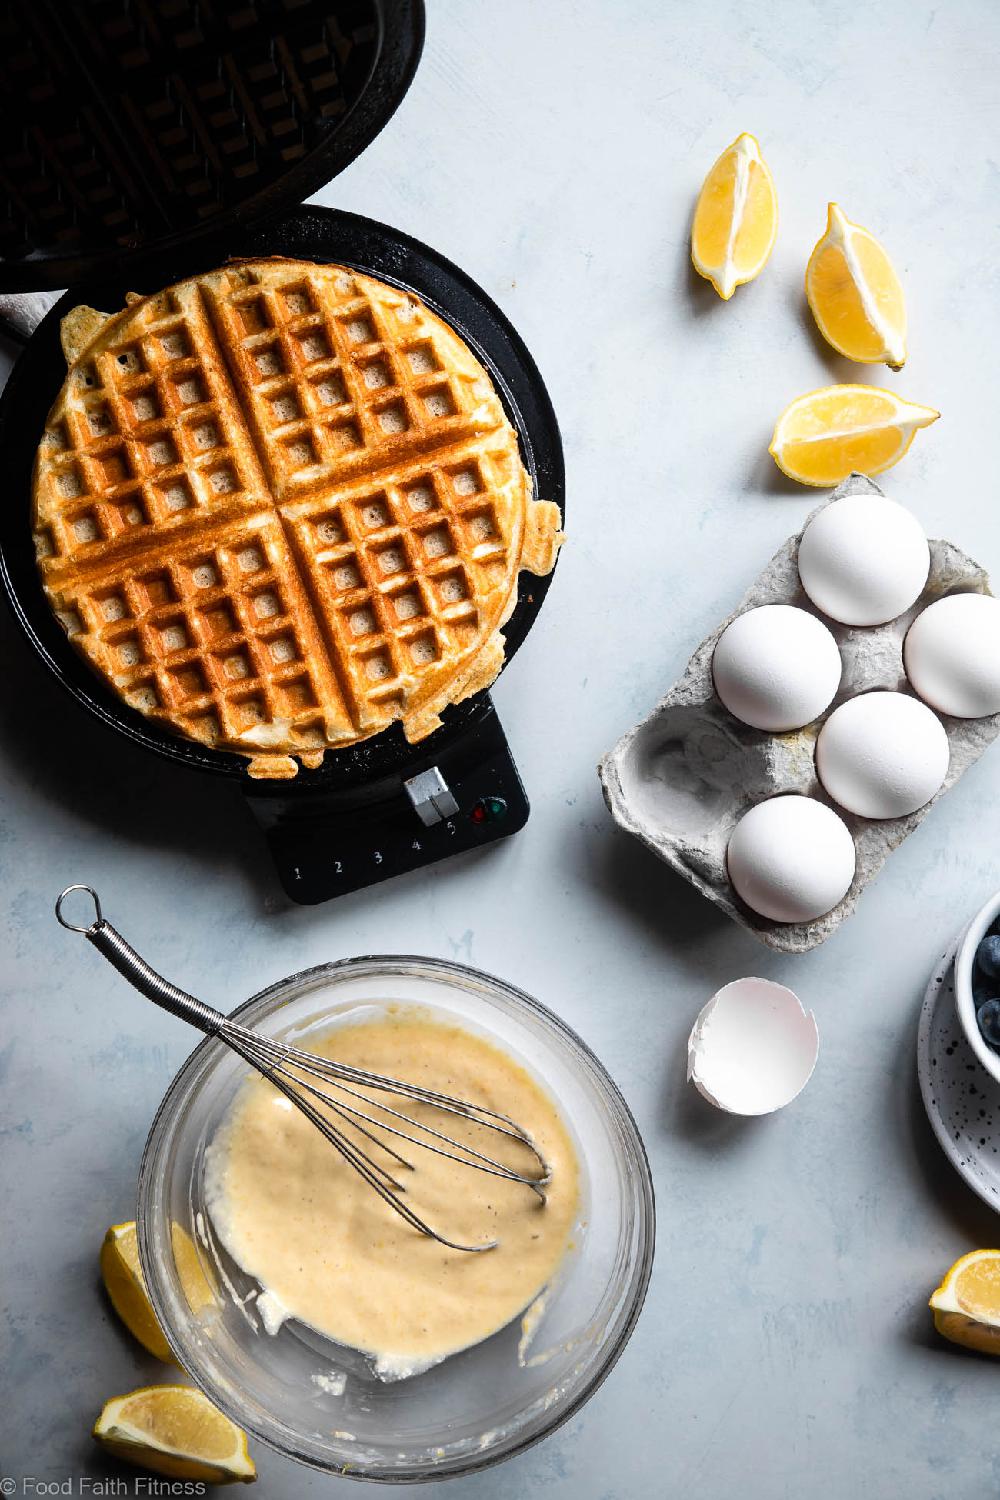 Lemon Blueberry Gluten Free Greek Yogurt Waffles - These gluten free waffles are so crispy and fluffy you will never believe they're low fat, oil free, protein packed and only 170 calories! | #Foodfaithfitness | #Glutenfree #Lowfat #Healthy #Waffles #Breakfast